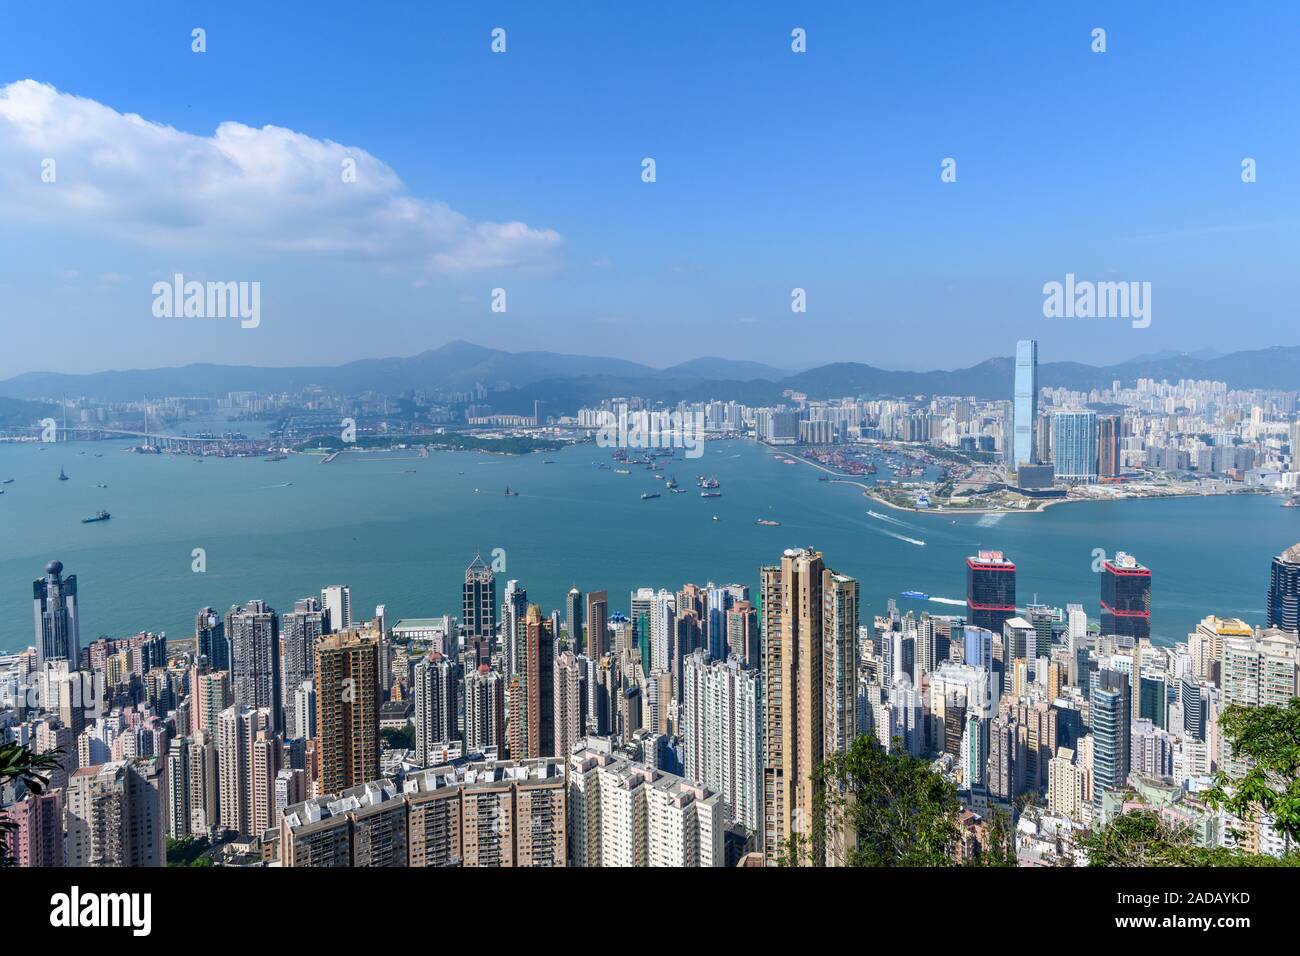 Hong Kong skyline and Victoria Harbour as seen from the Peak during the day. Stock Photo